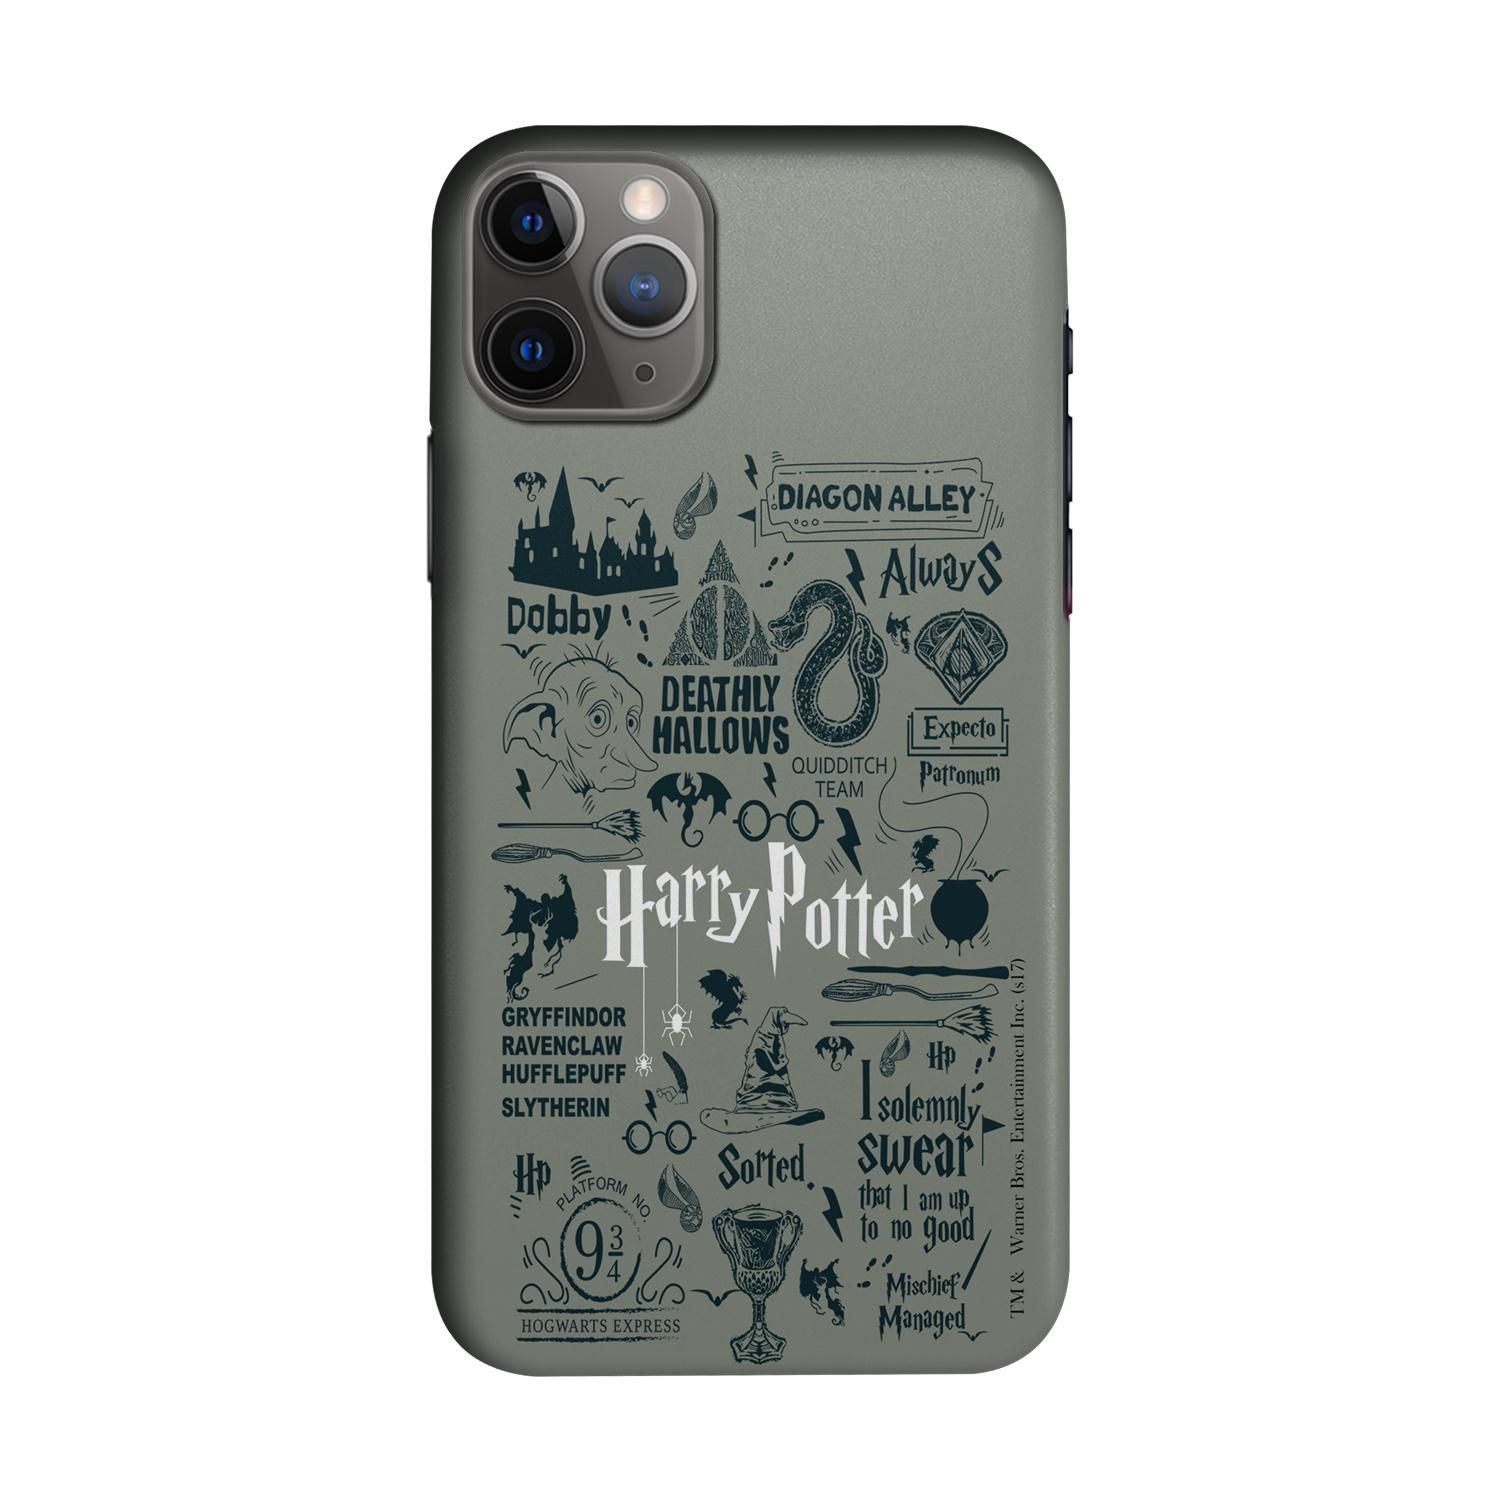 Buy Harry Potter Infographic Grey - Sleek Phone Case for iPhone 11 Pro Max Online